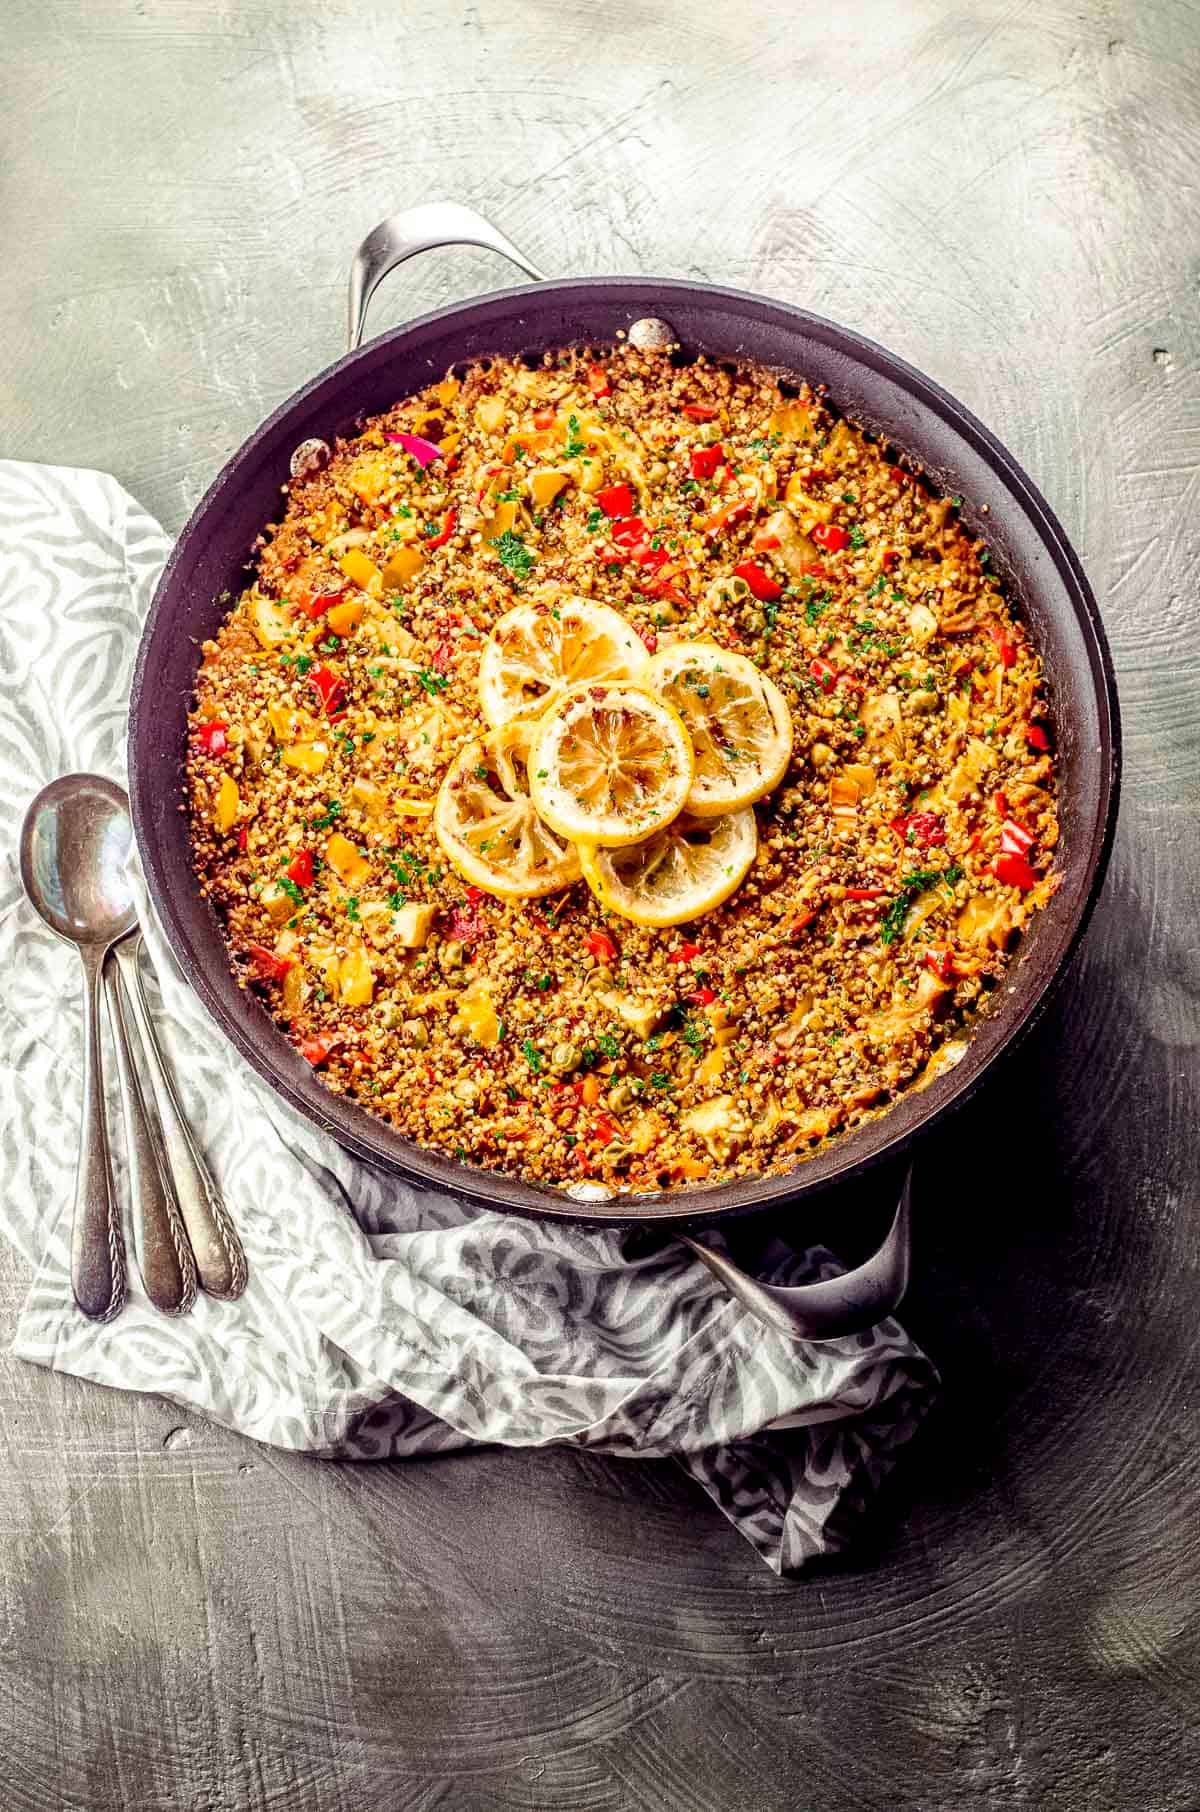 An overhead view of a skillet with quinoa paella